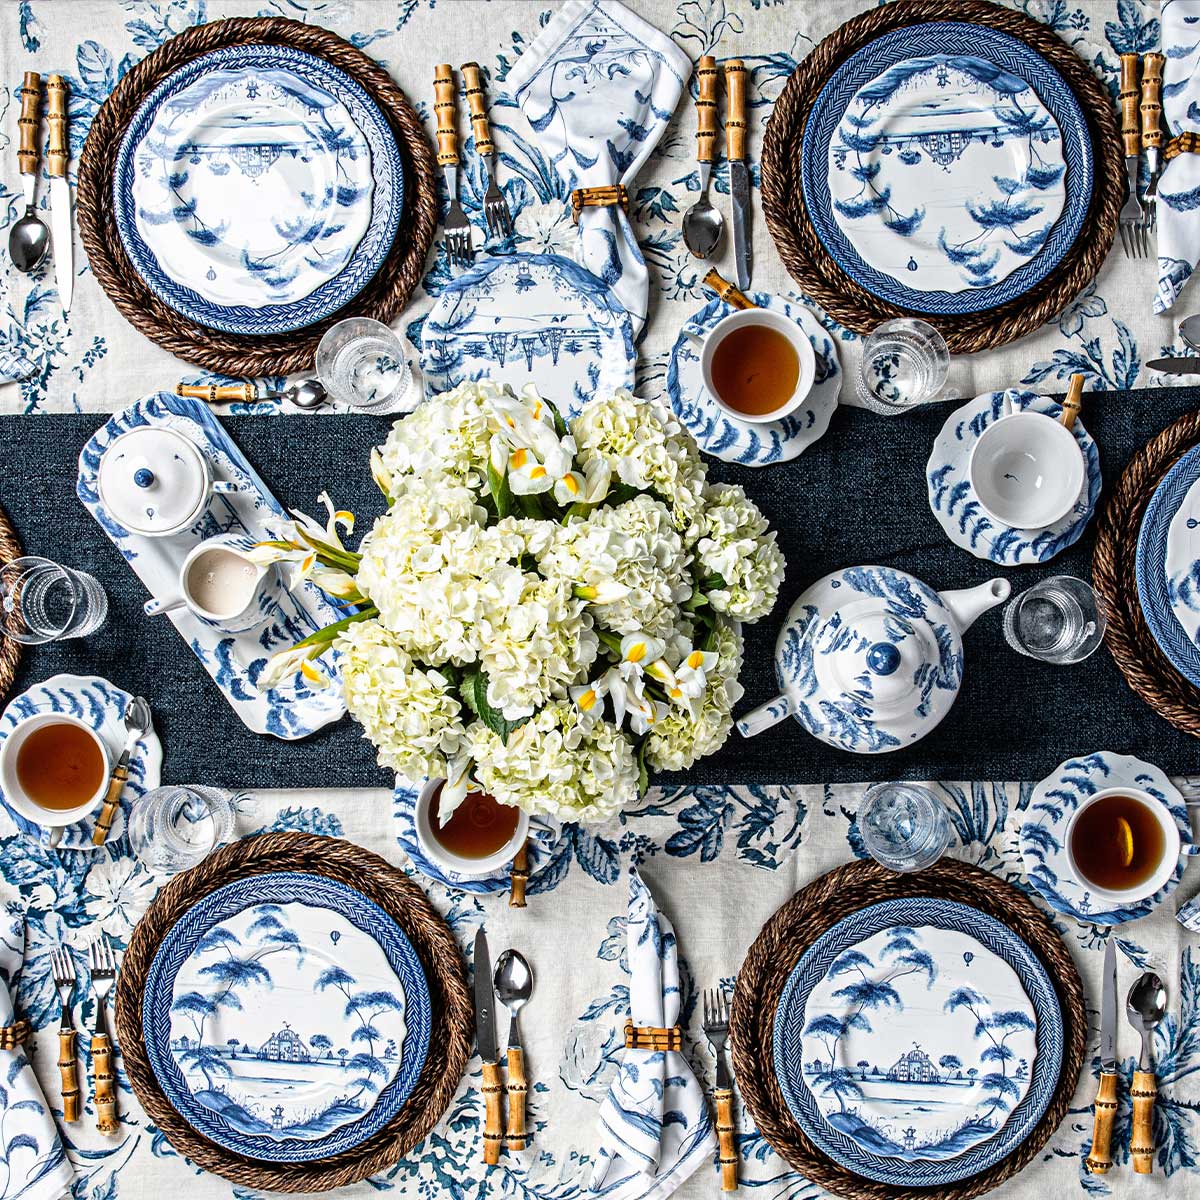 A beautiful Country Estate Delft Blue table setting.